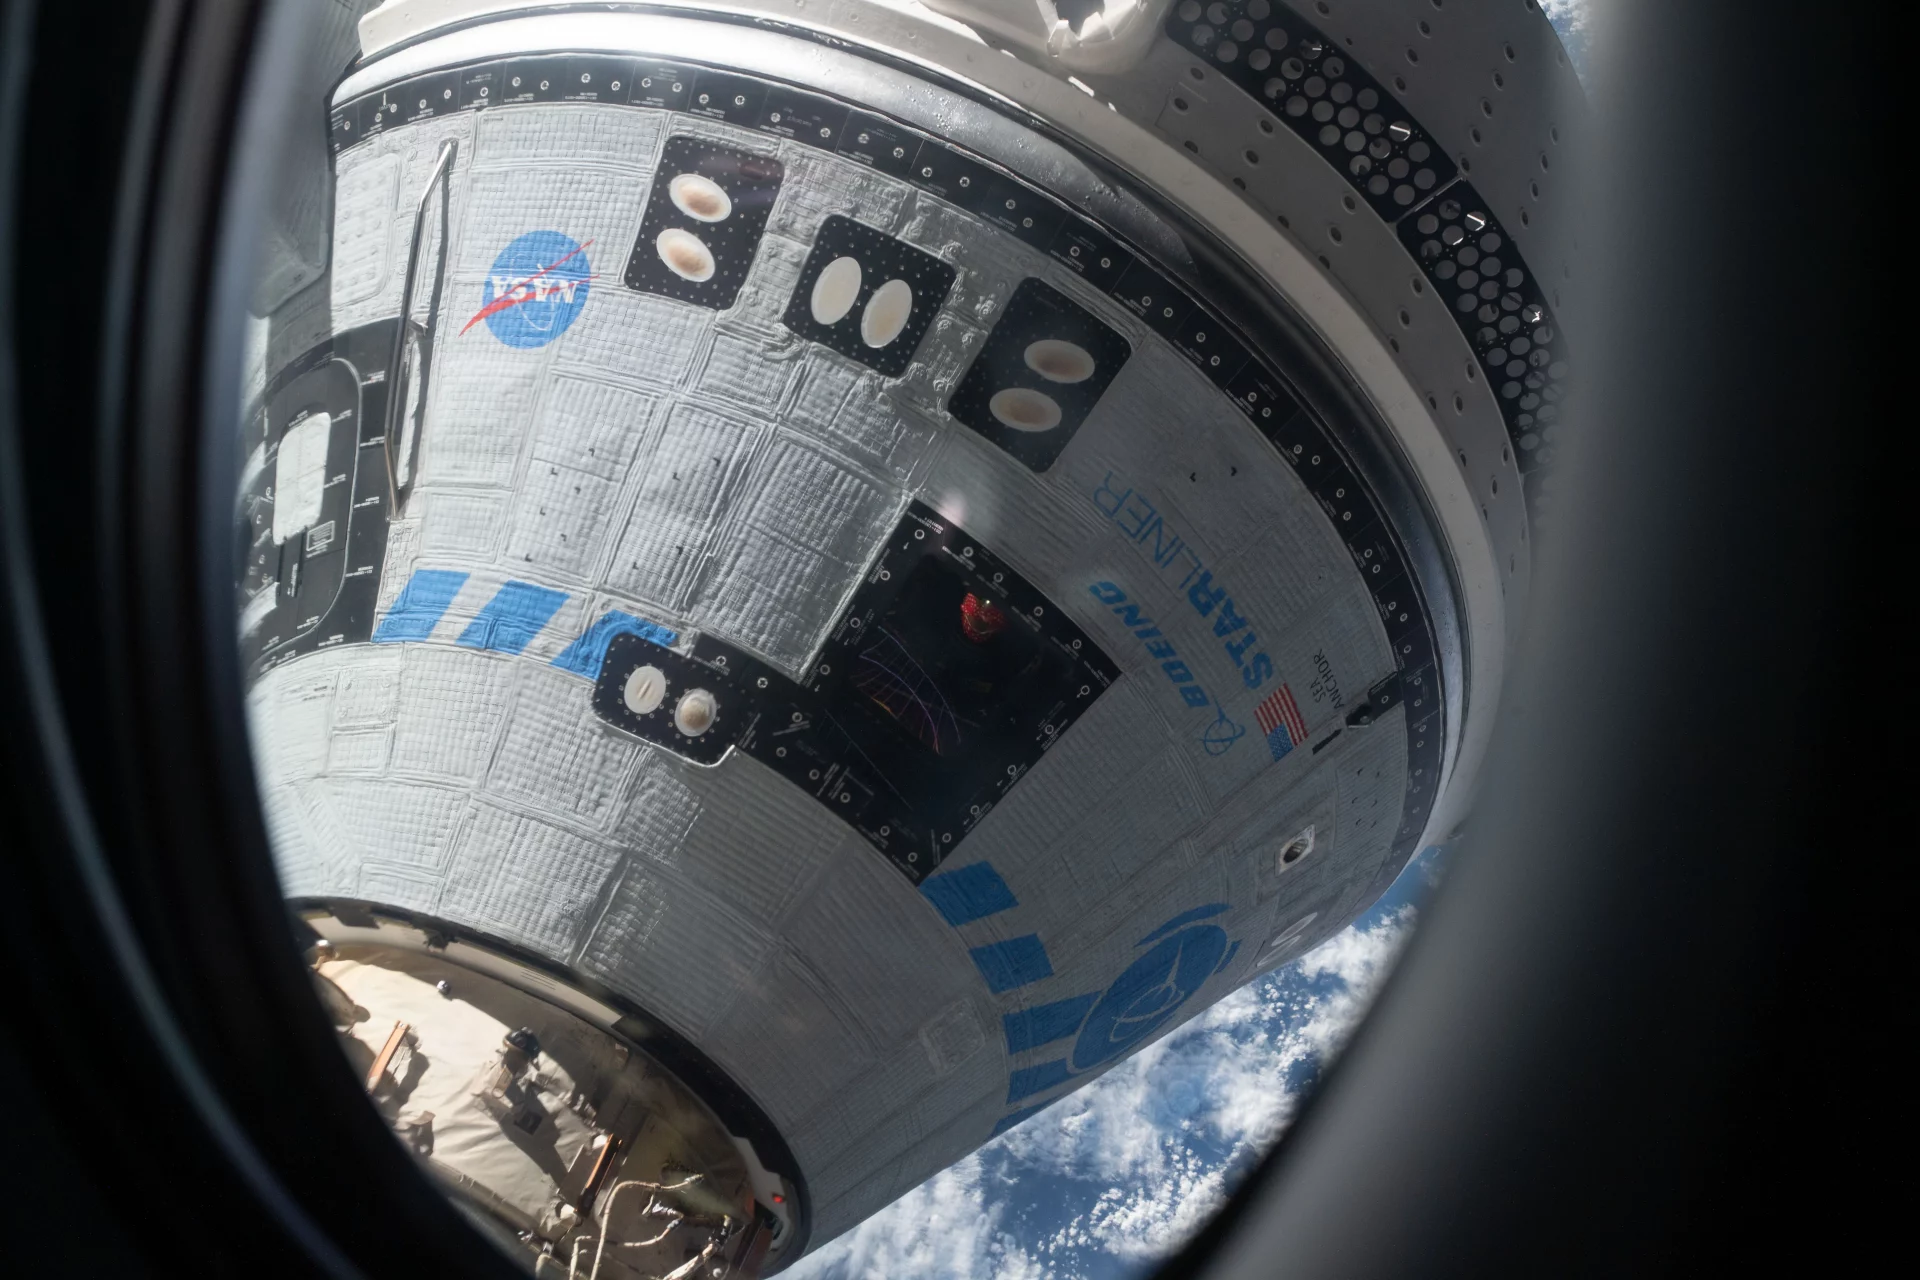 Technical problems keep two NASA astronauts trapped in space